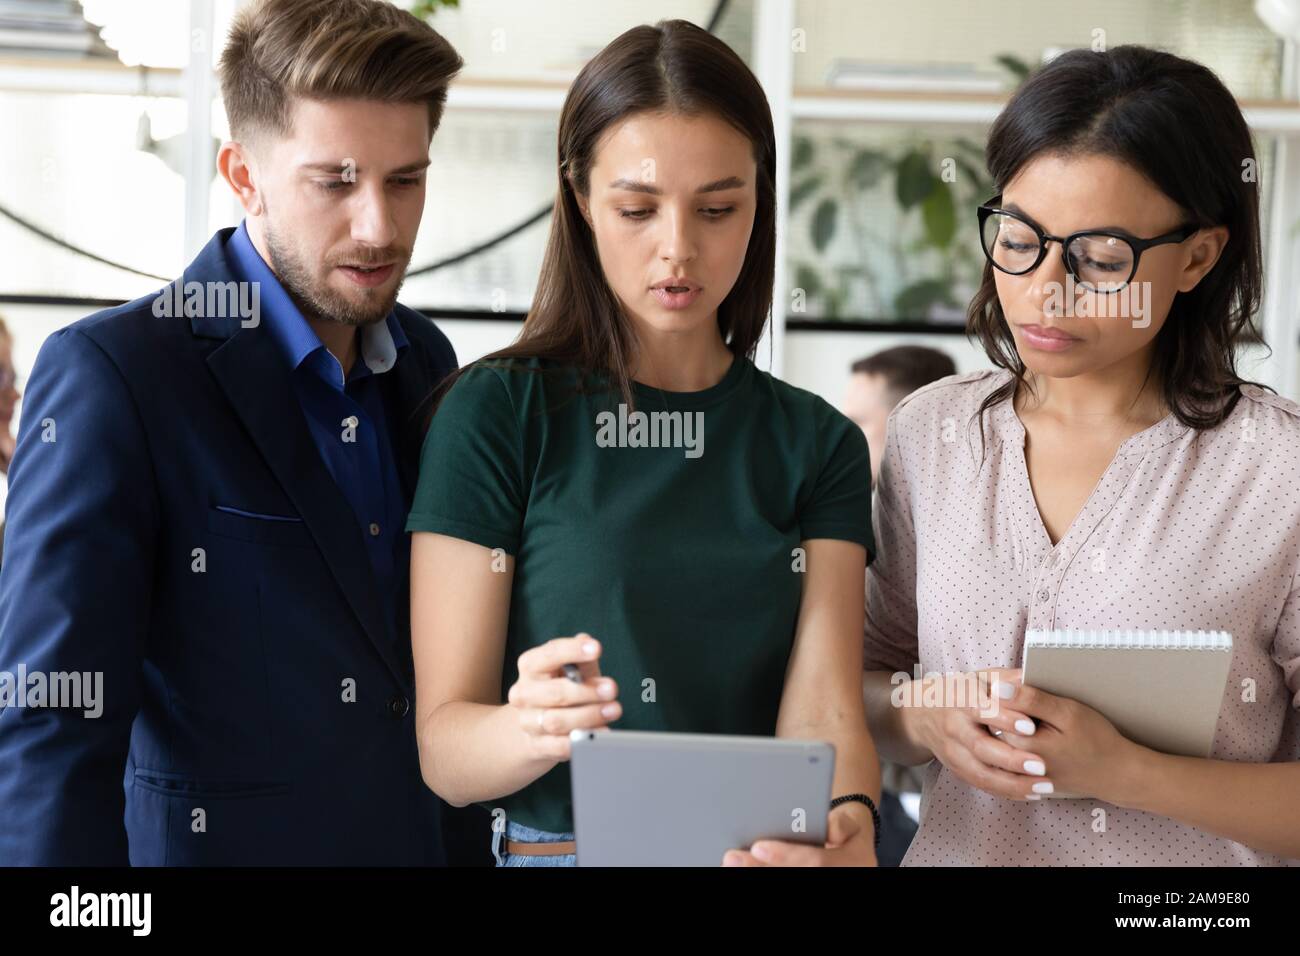 Group of millennial multiethnic workers working together using tablet app Stock Photo